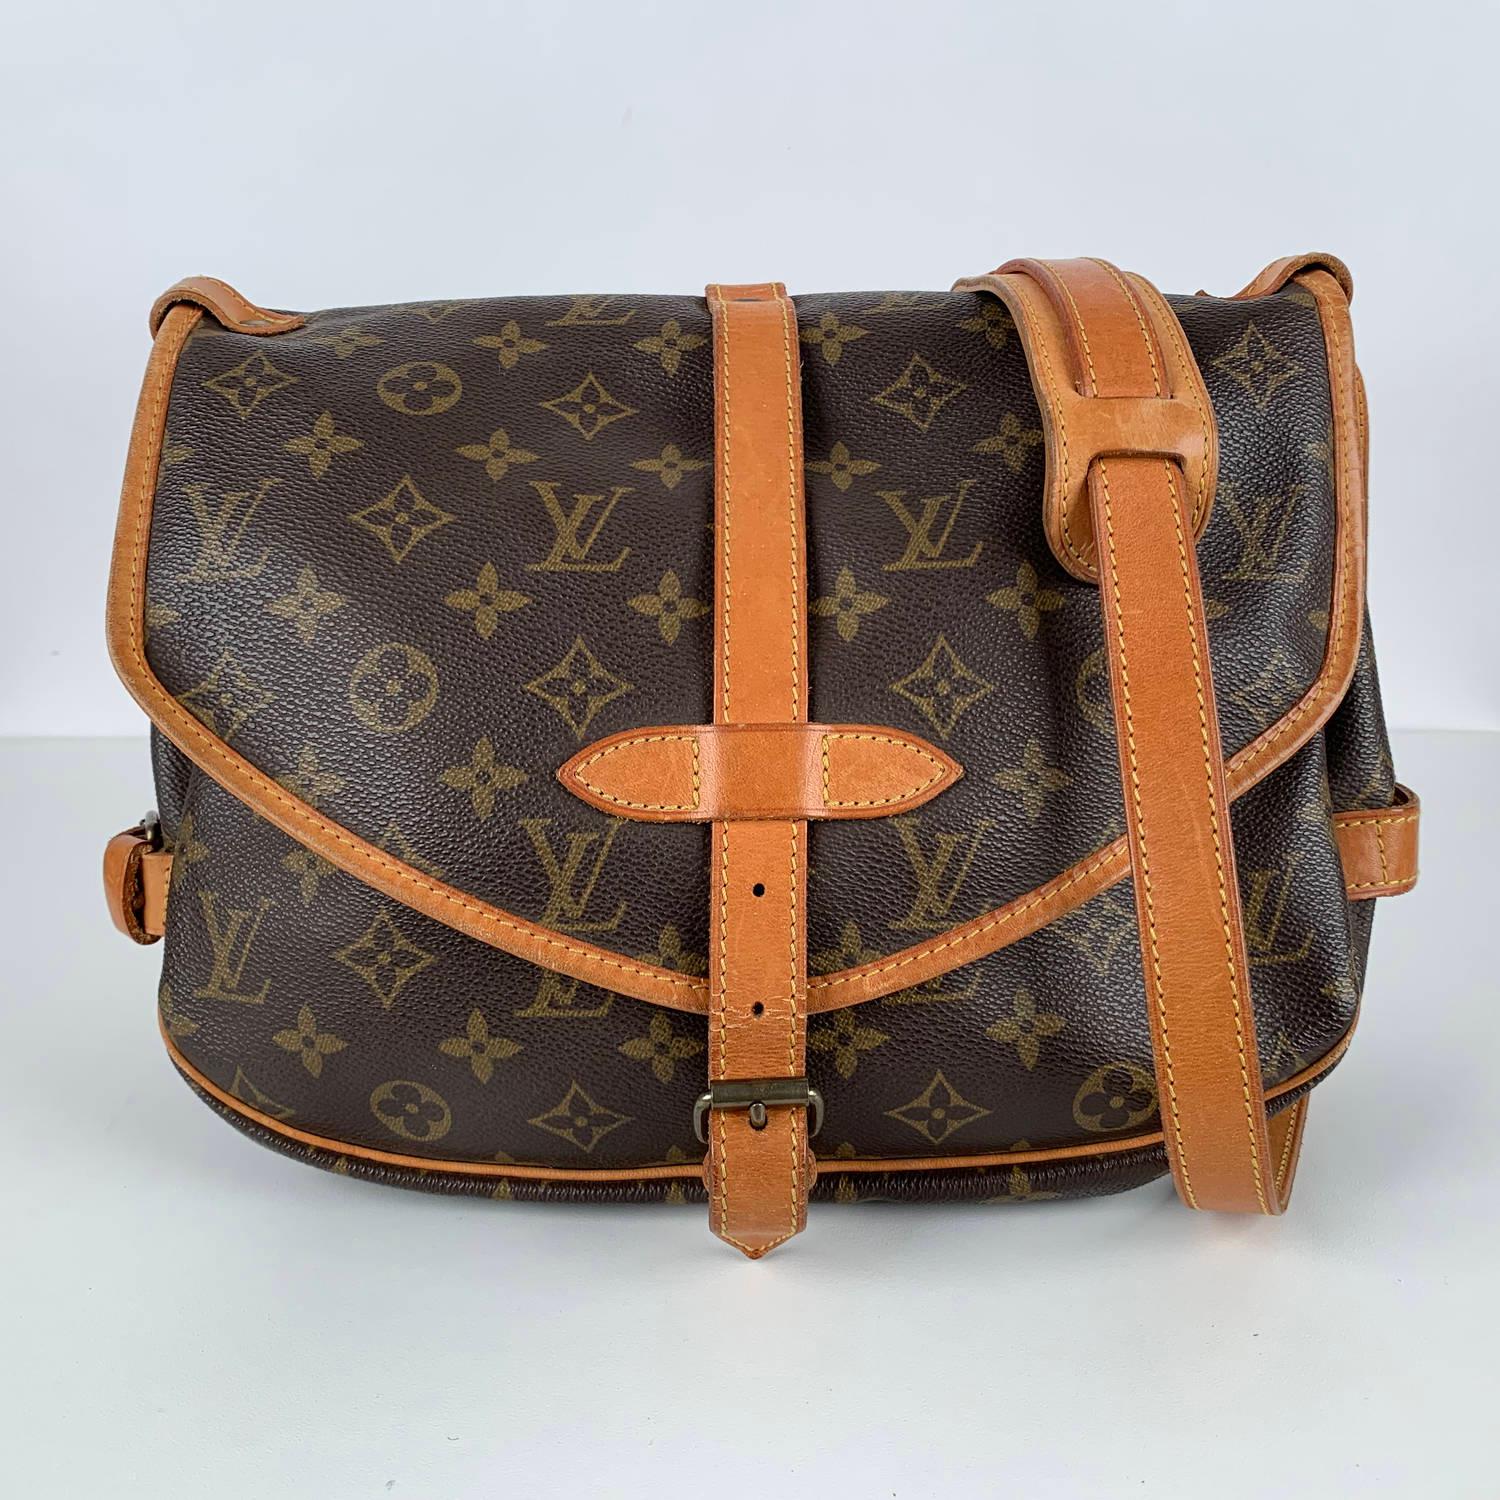 LOUIS VUITTON 'Saumur 30' inspired by equestrian 'SADDLE' bag. The legendary SAUMUR features dual front compartments, held tightly together at the sides with belt-like tabs. Adjustable long shoulder strap with pad for added comfort. 

- Monogram